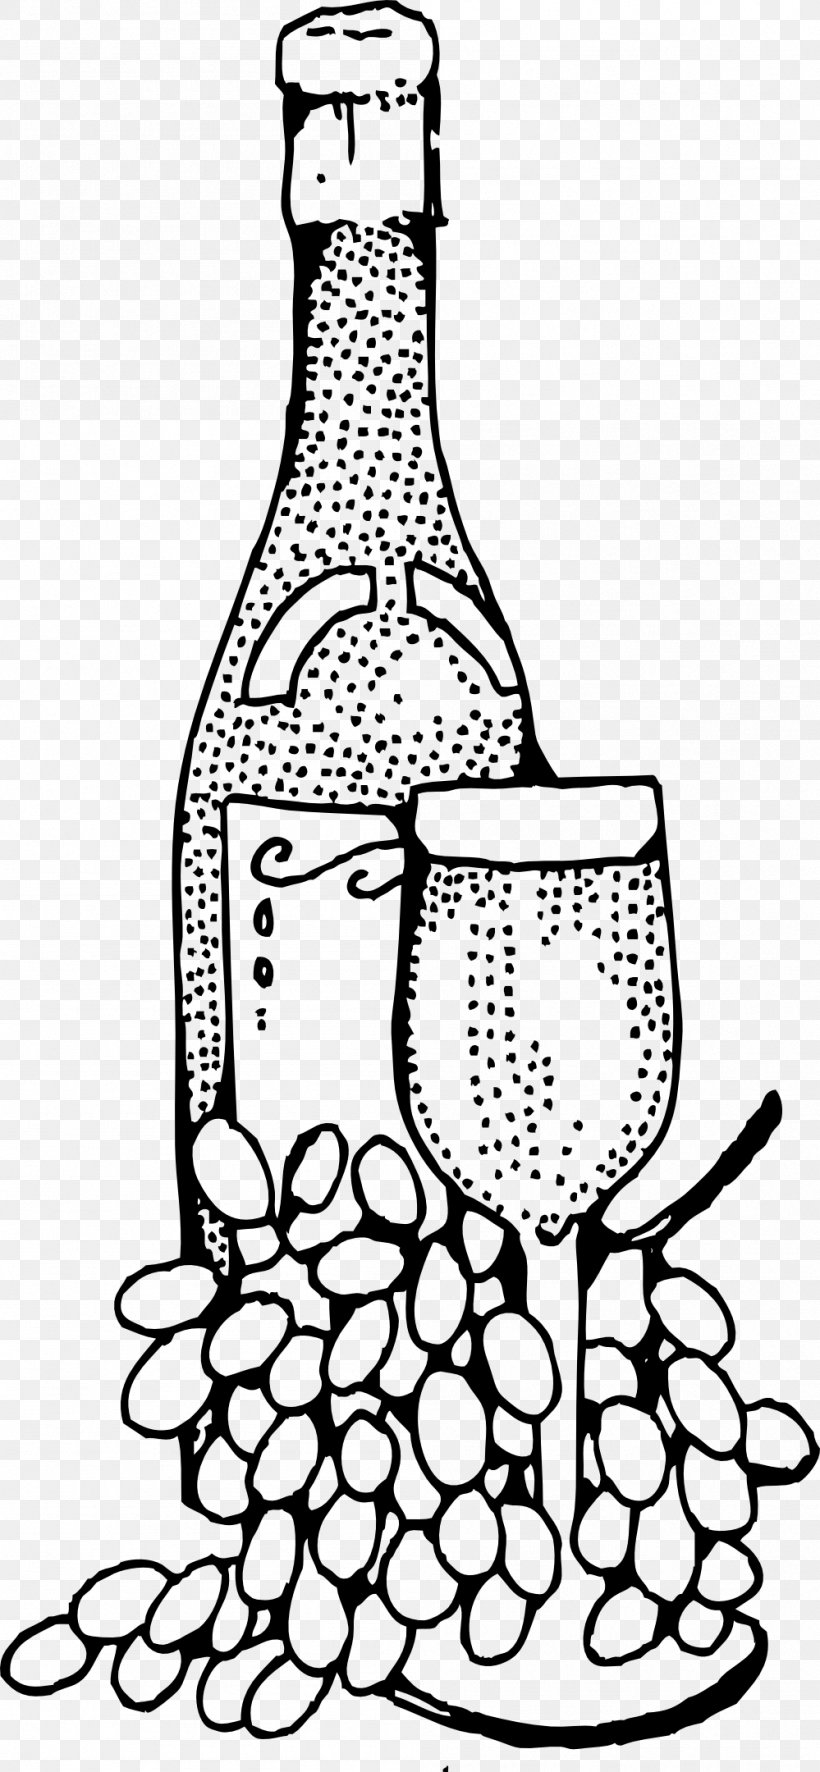 White Wine Bottle Ready-to-Use Food And Drink Spot Illustrations Clip Art, PNG, 999x2160px, Wine, Black And White, Bottle, Drinkware, Food Download Free